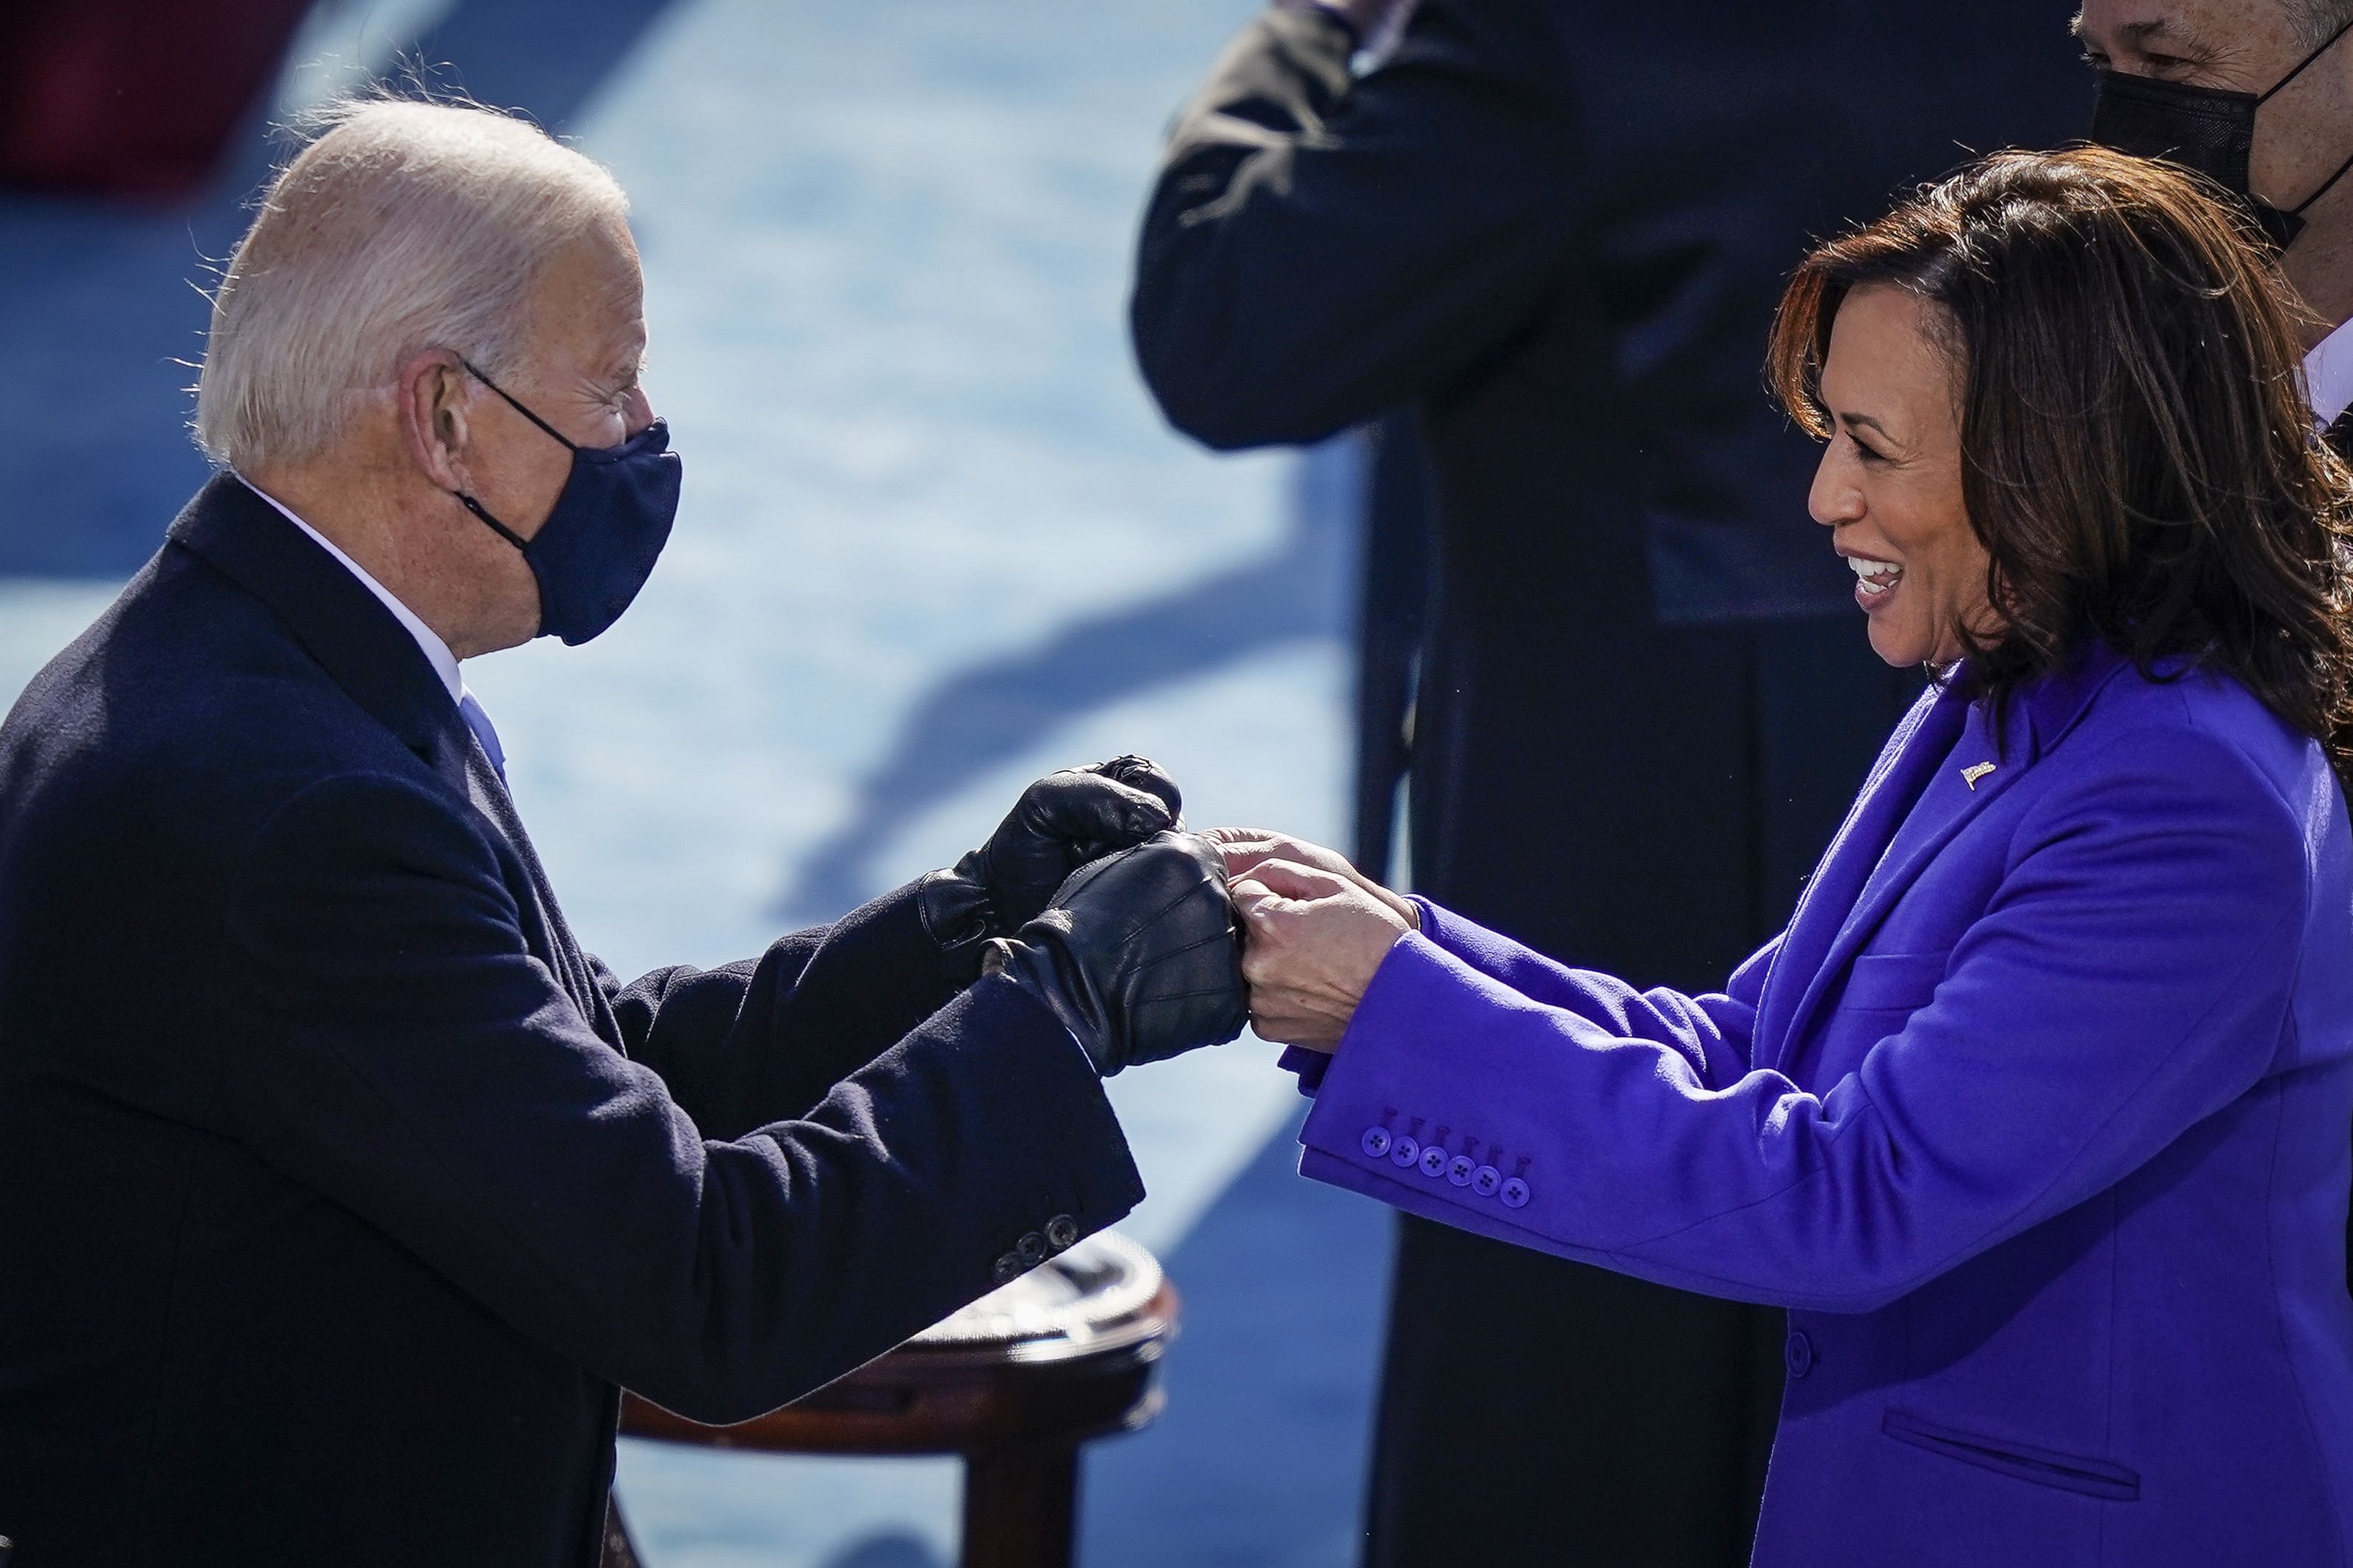 President-elect Joe Biden fist bumps newly sworn-in Vice President Kamala Harris after she took the oath of office on the West Front of the U.S. Capitol on January 20, 2021 in Washington, DC. Biden was sworn in today as the 46th president of the United States. Credit: Getty Images/AFP